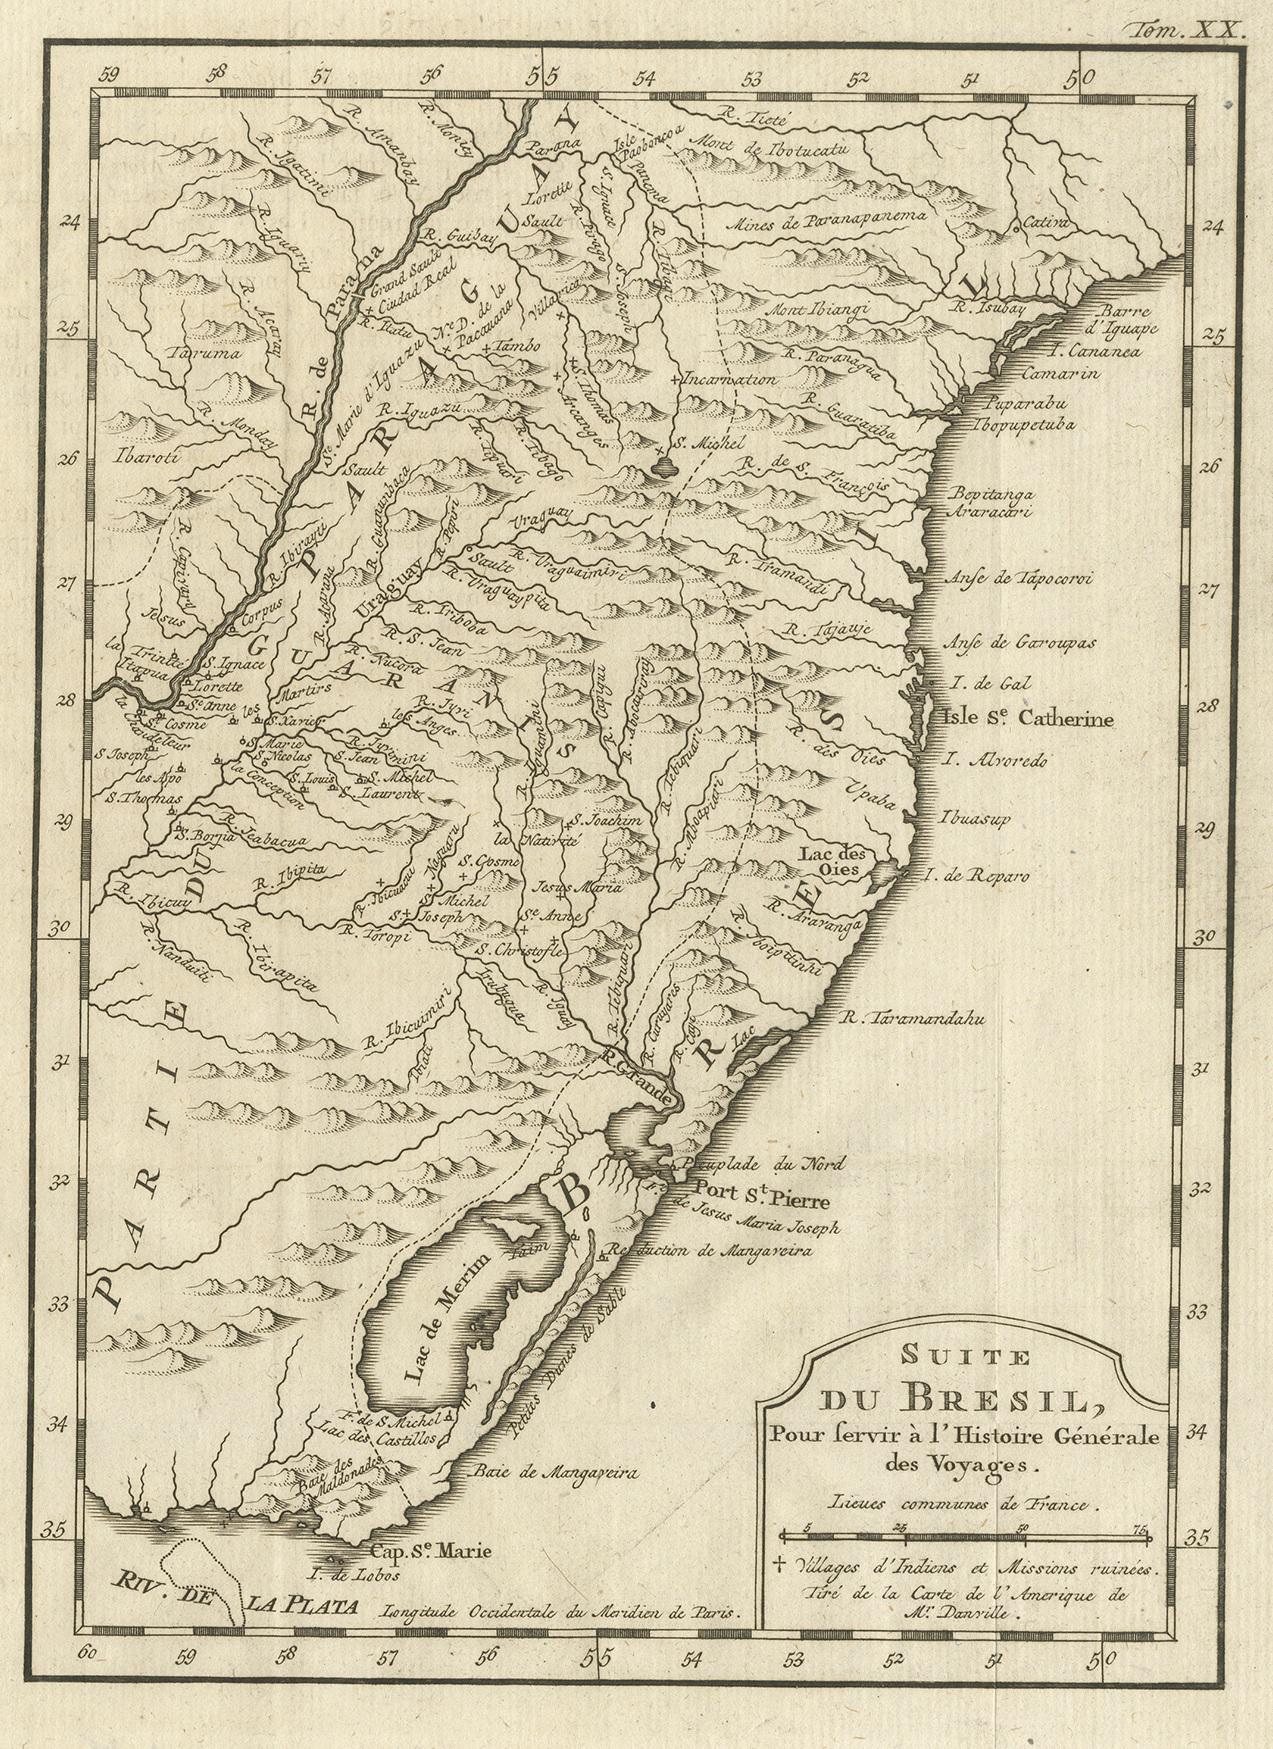 Antique map titled 'Suite de Bresil'. Old map of the coast of southern Brazil, with Lagoa Mirim, and Uruguay (here named as Paraguay). Originates from 'L'Histoire générale des Voyages'.